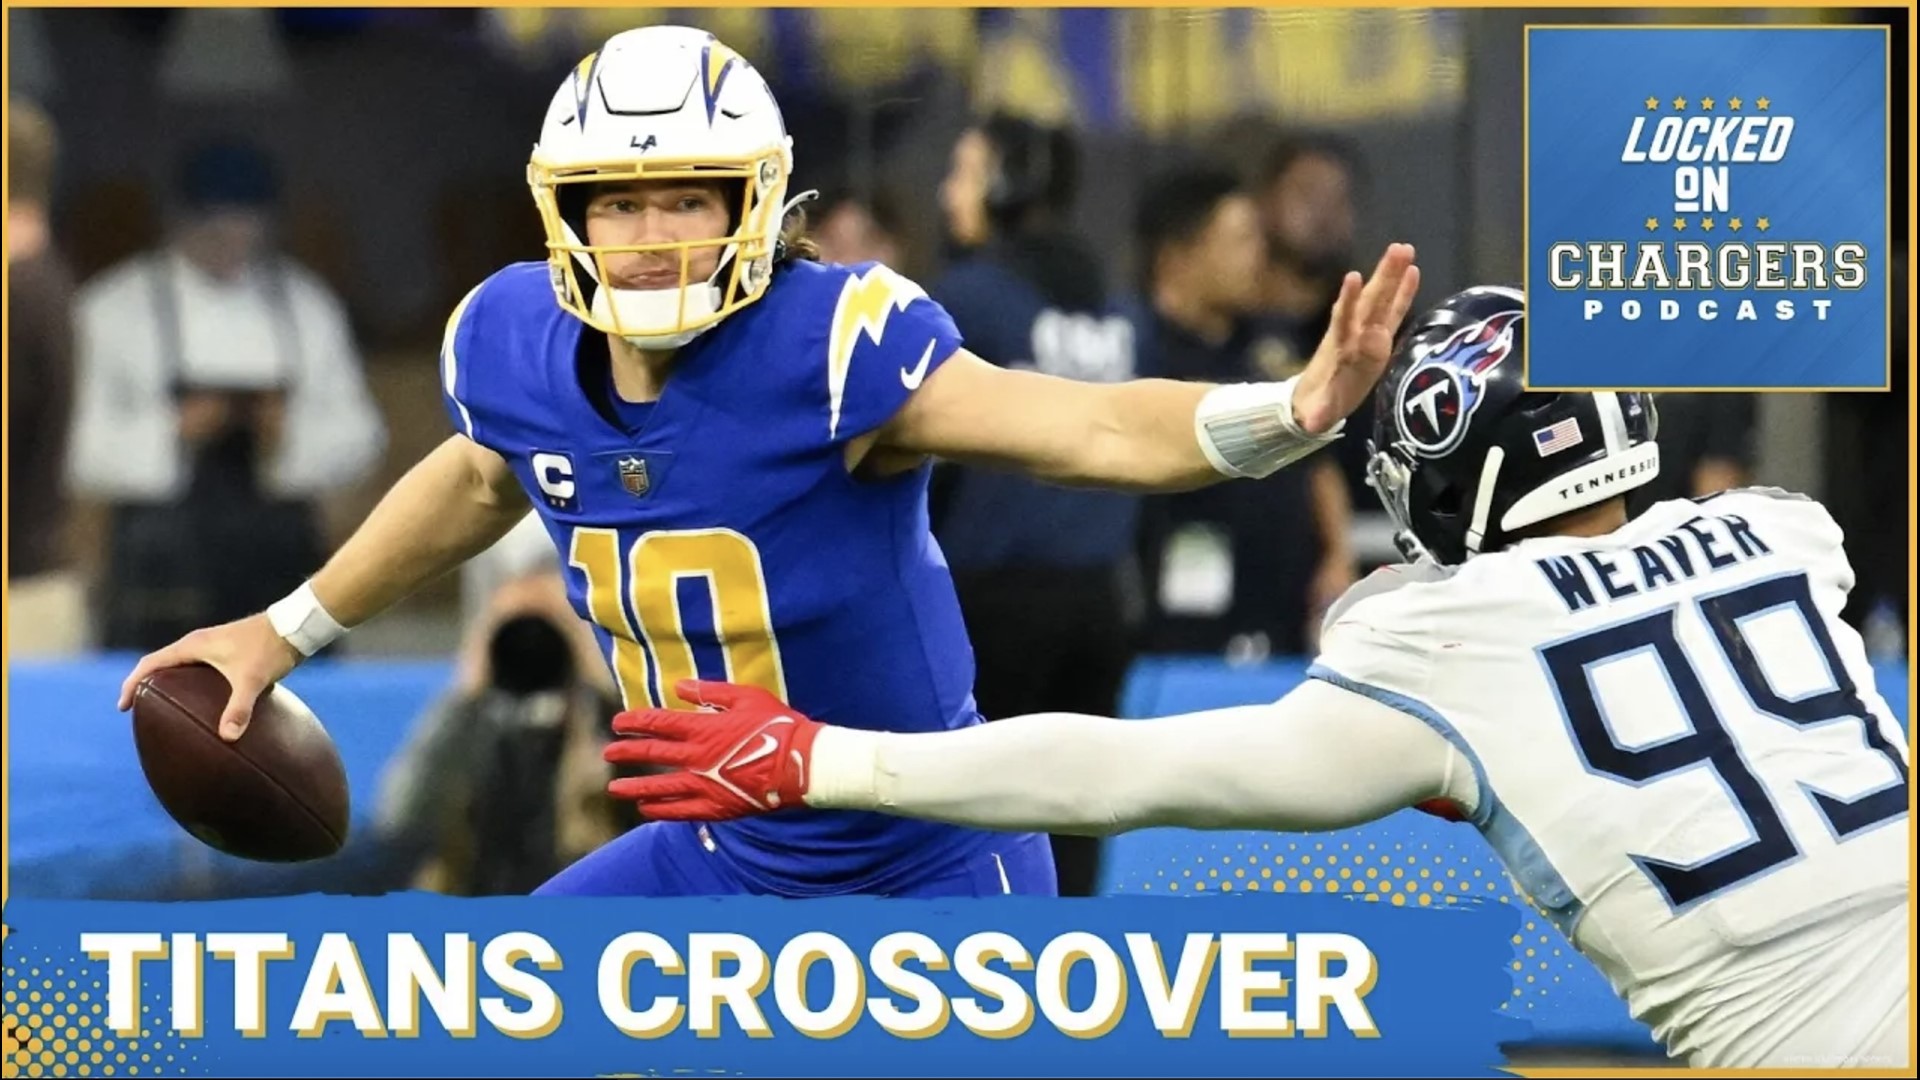 The Chargers defense got shredded against the Dolphins in week one and they will need to show up this week against a much less dynamic Titans offense.